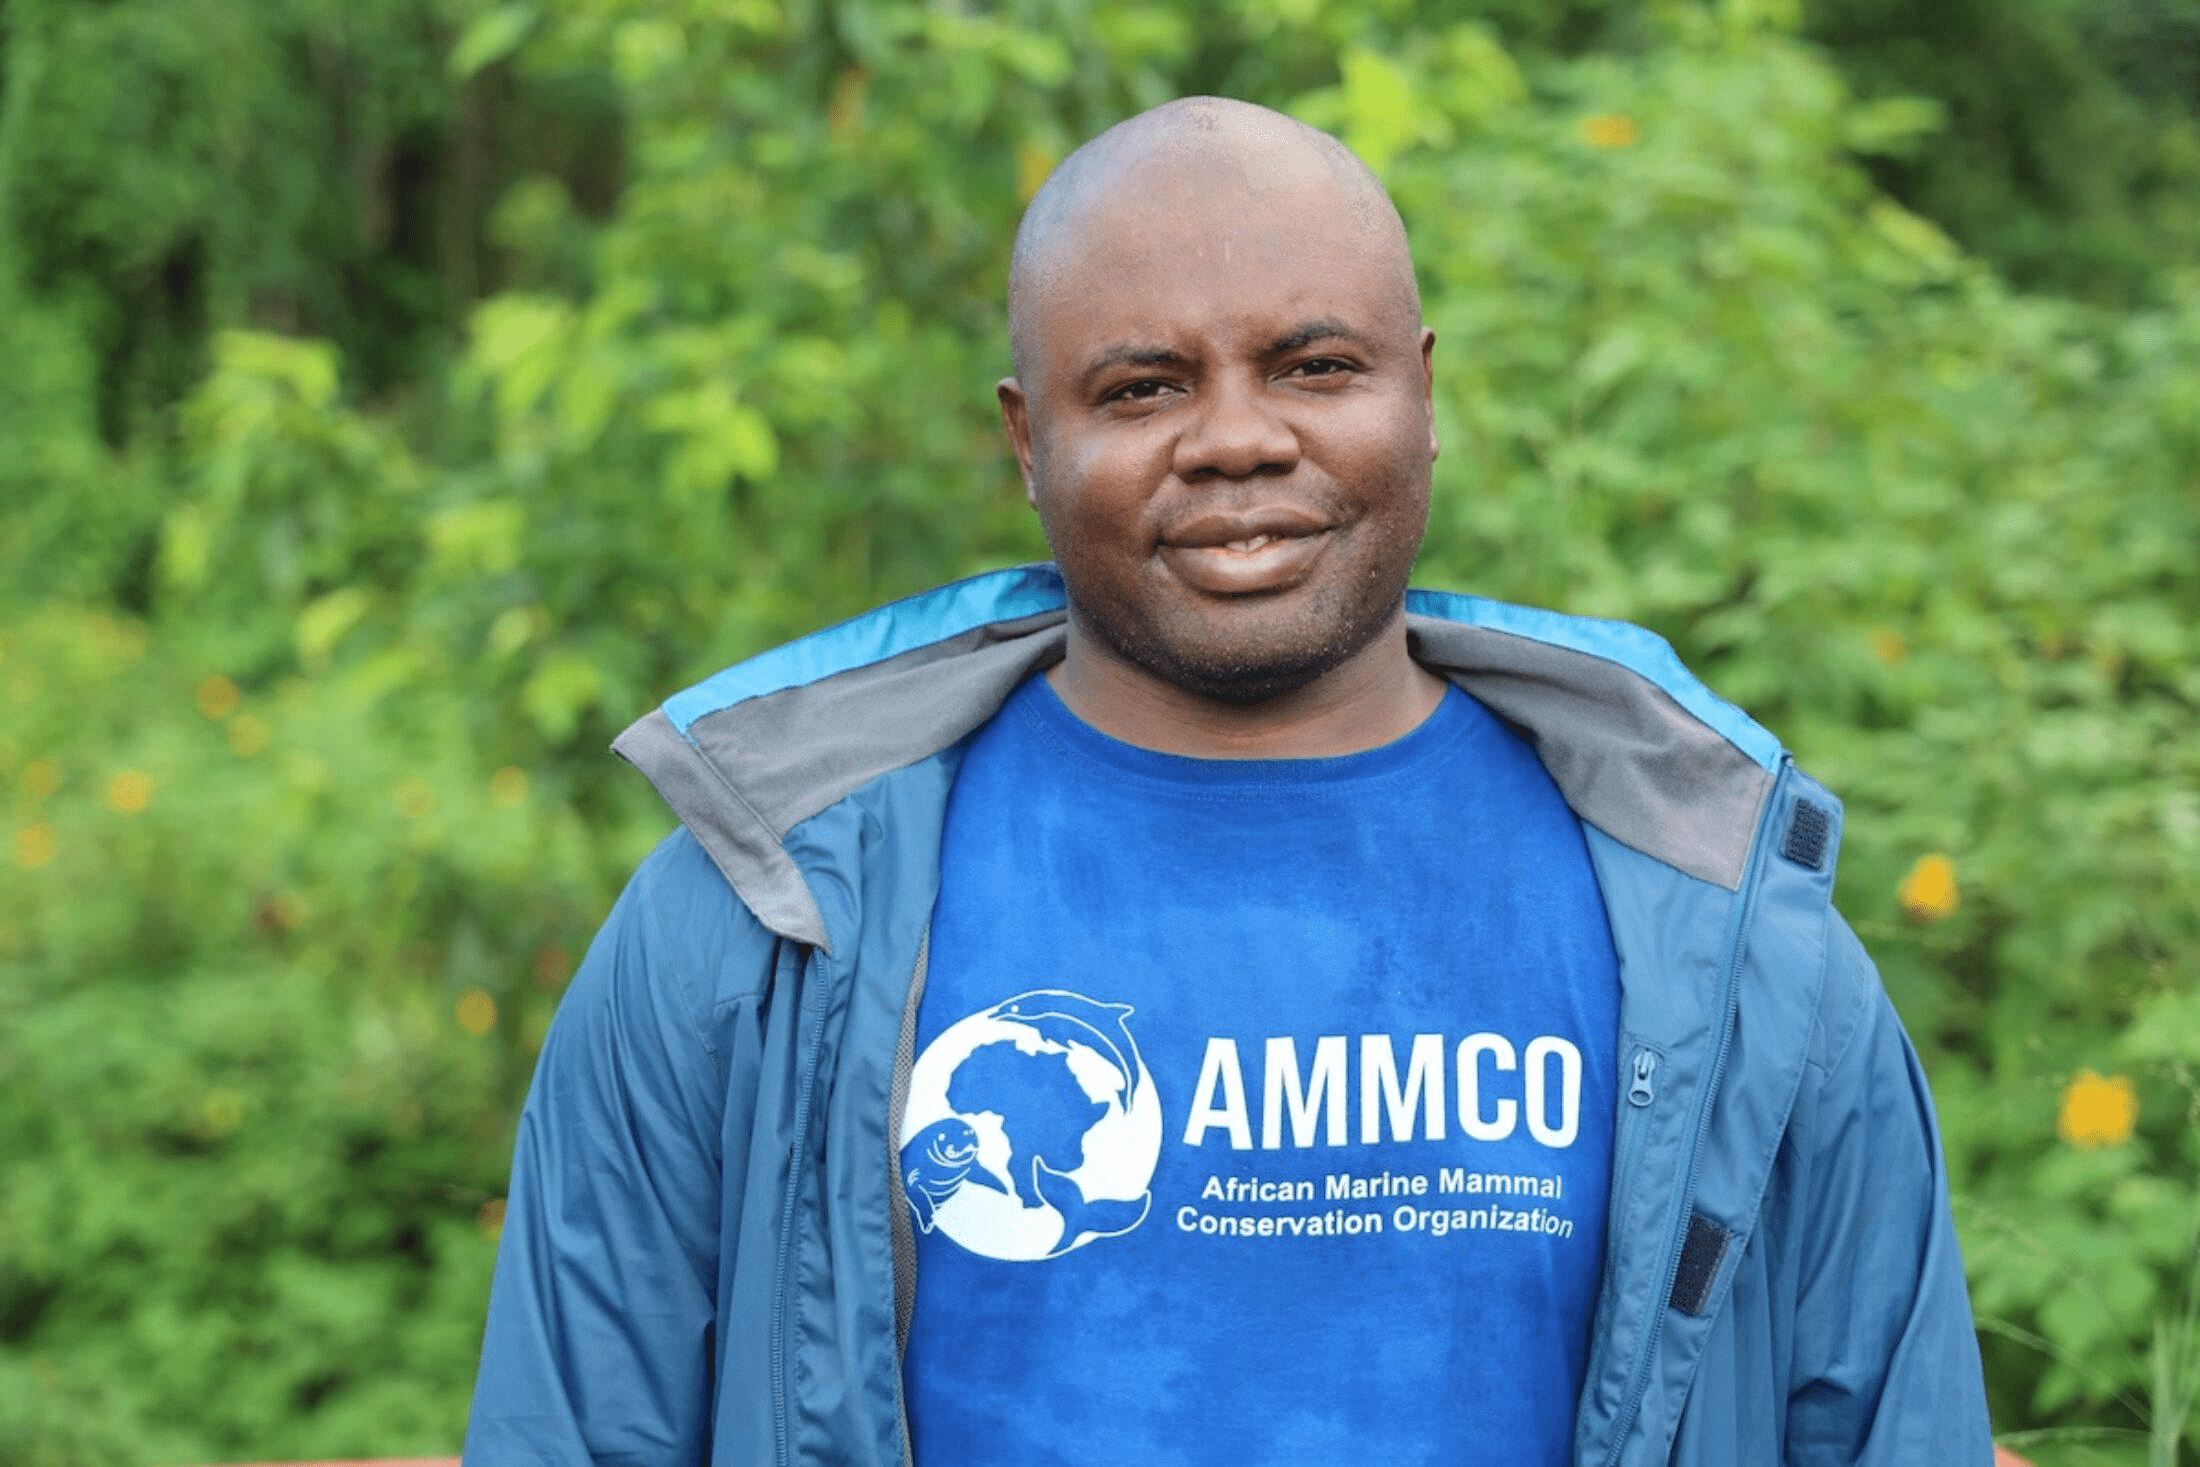 Conservationist Aristide from Cameroon